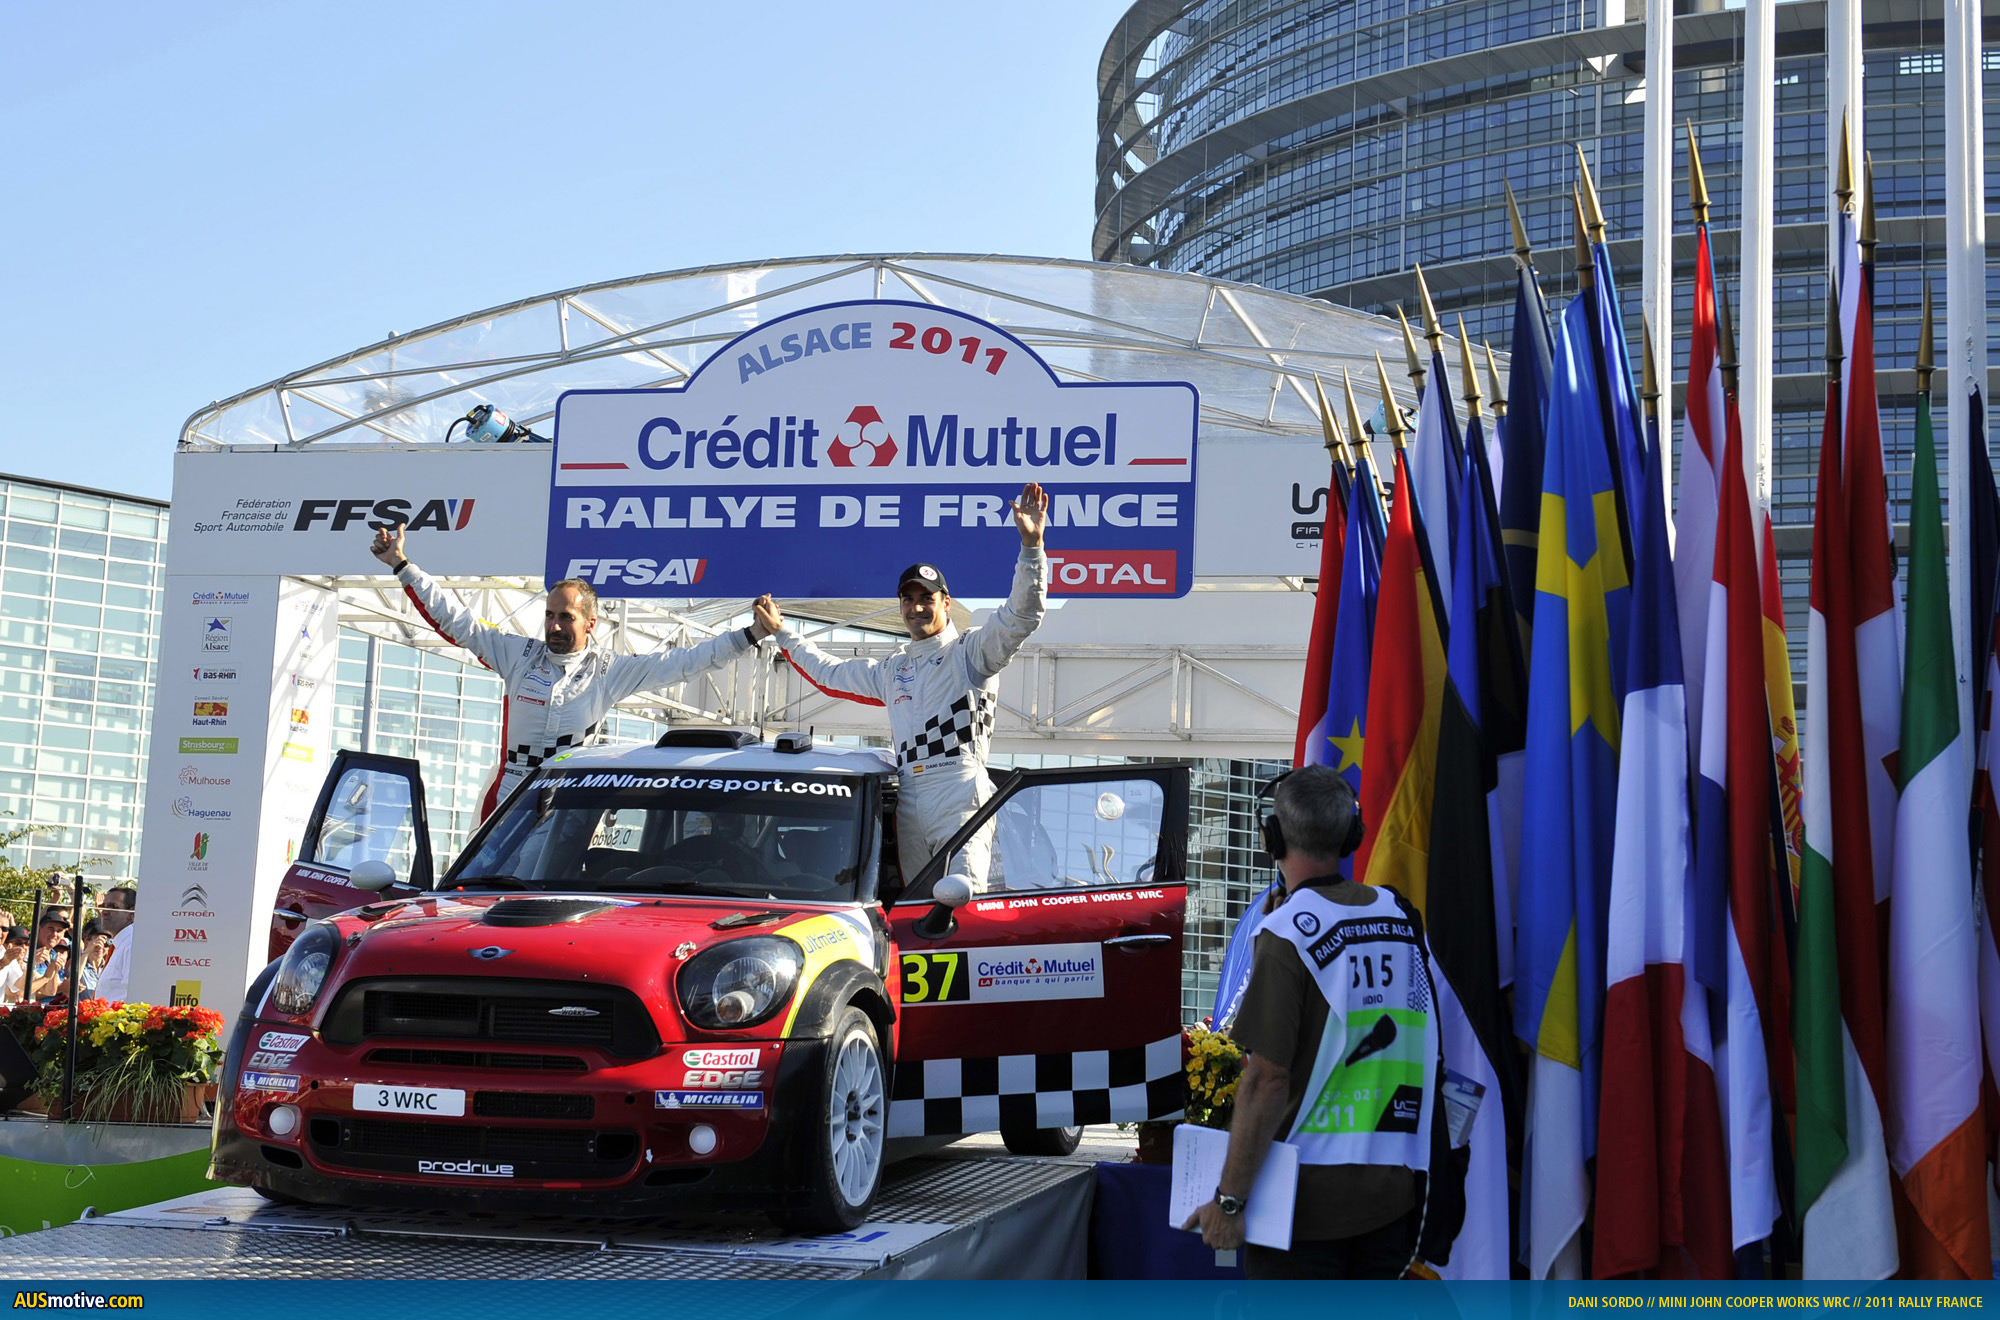 MINI WRC Team on pace to take